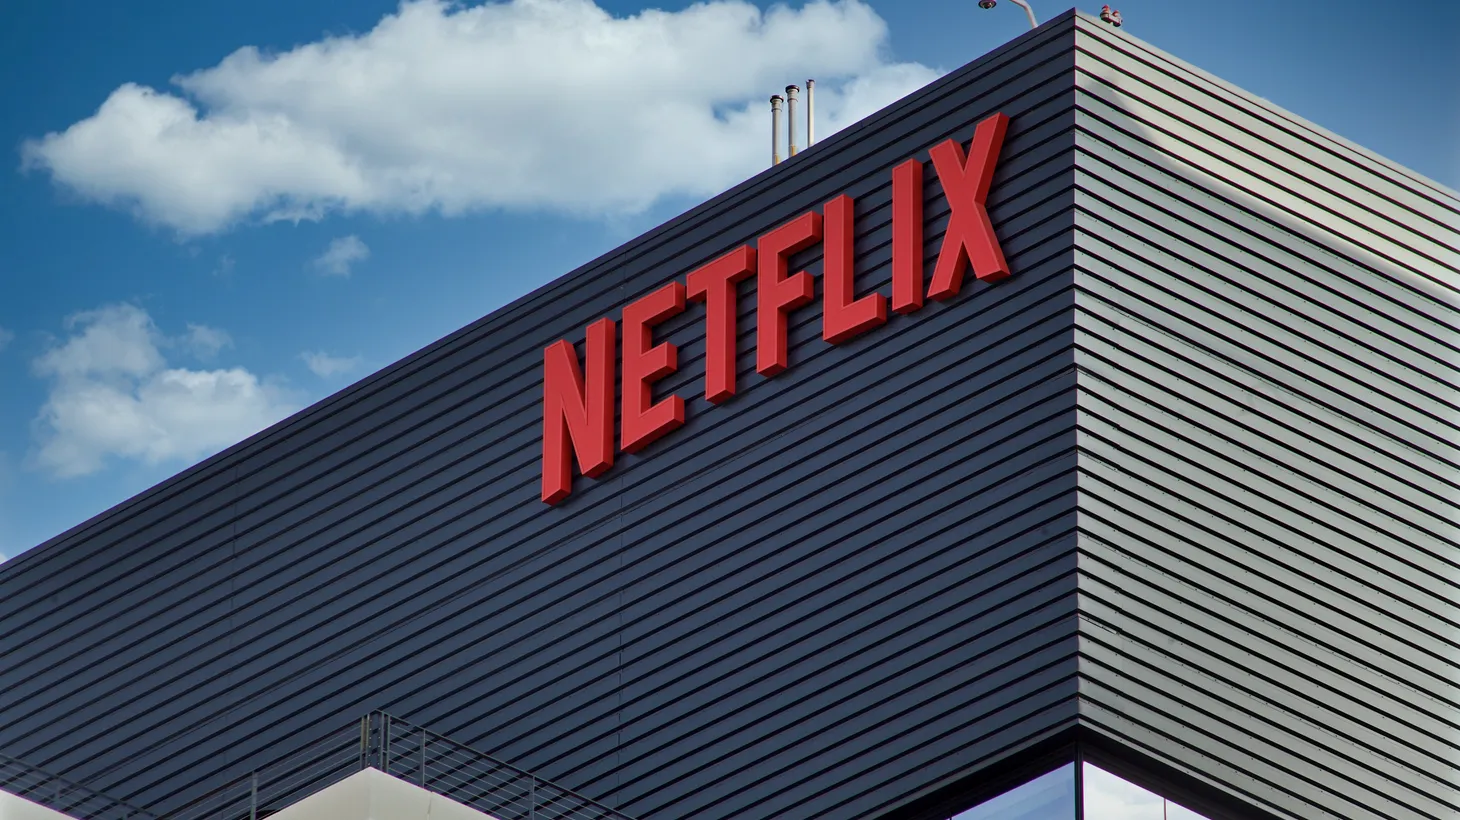 “[If] you’re Netflix and you've been in the business of creating TV shows and movies for maybe 10 or 12 years or so, that's a tough hill to climb — to be able to compete with companies that have been doing this for upwards of close to 100 years,” says LA Times reporter Ryan Faughnder.